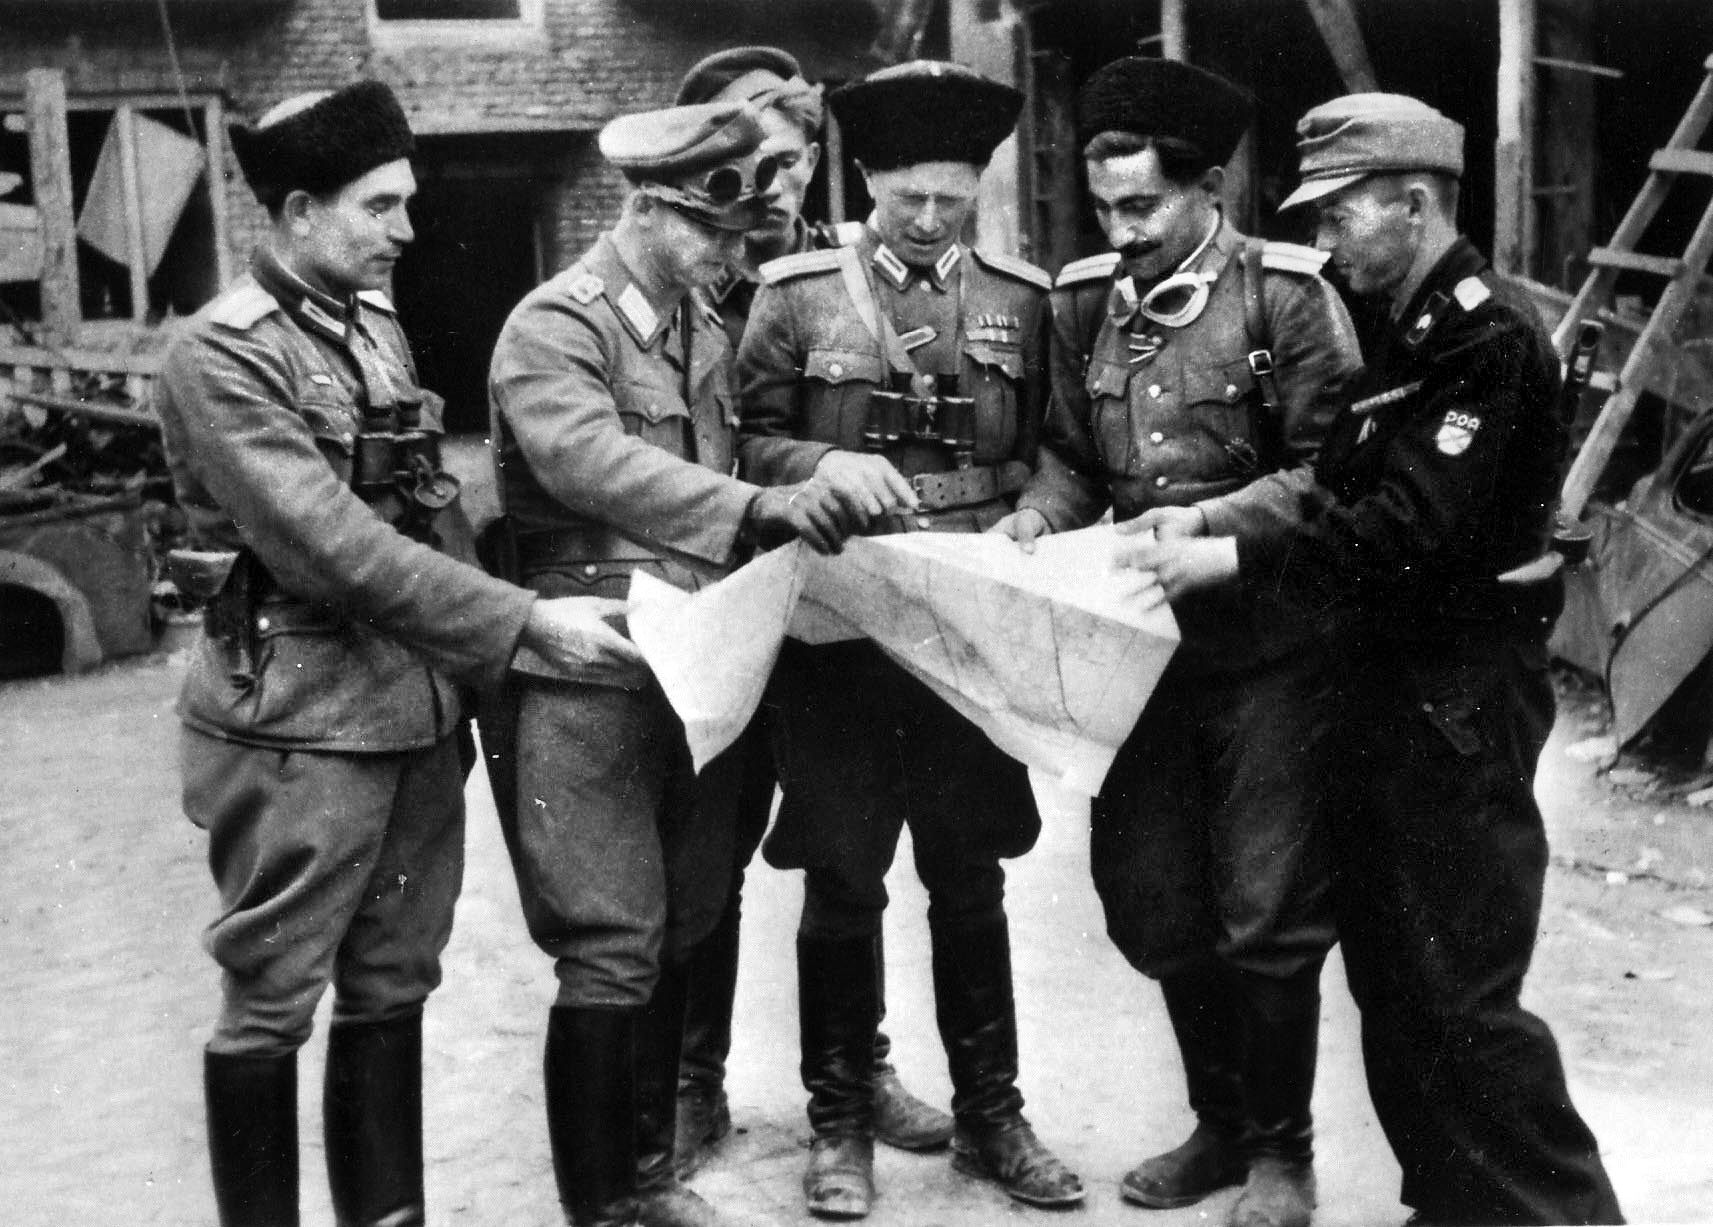 Major Ivan Denisovich Frolov (center) defected from the Red Army and commanded a unit of the Russian Liberation Army (RONA) that collaborated with the Germans to crush the uprising. Frolov was executed as a traitor by the Soviets in 1946. 